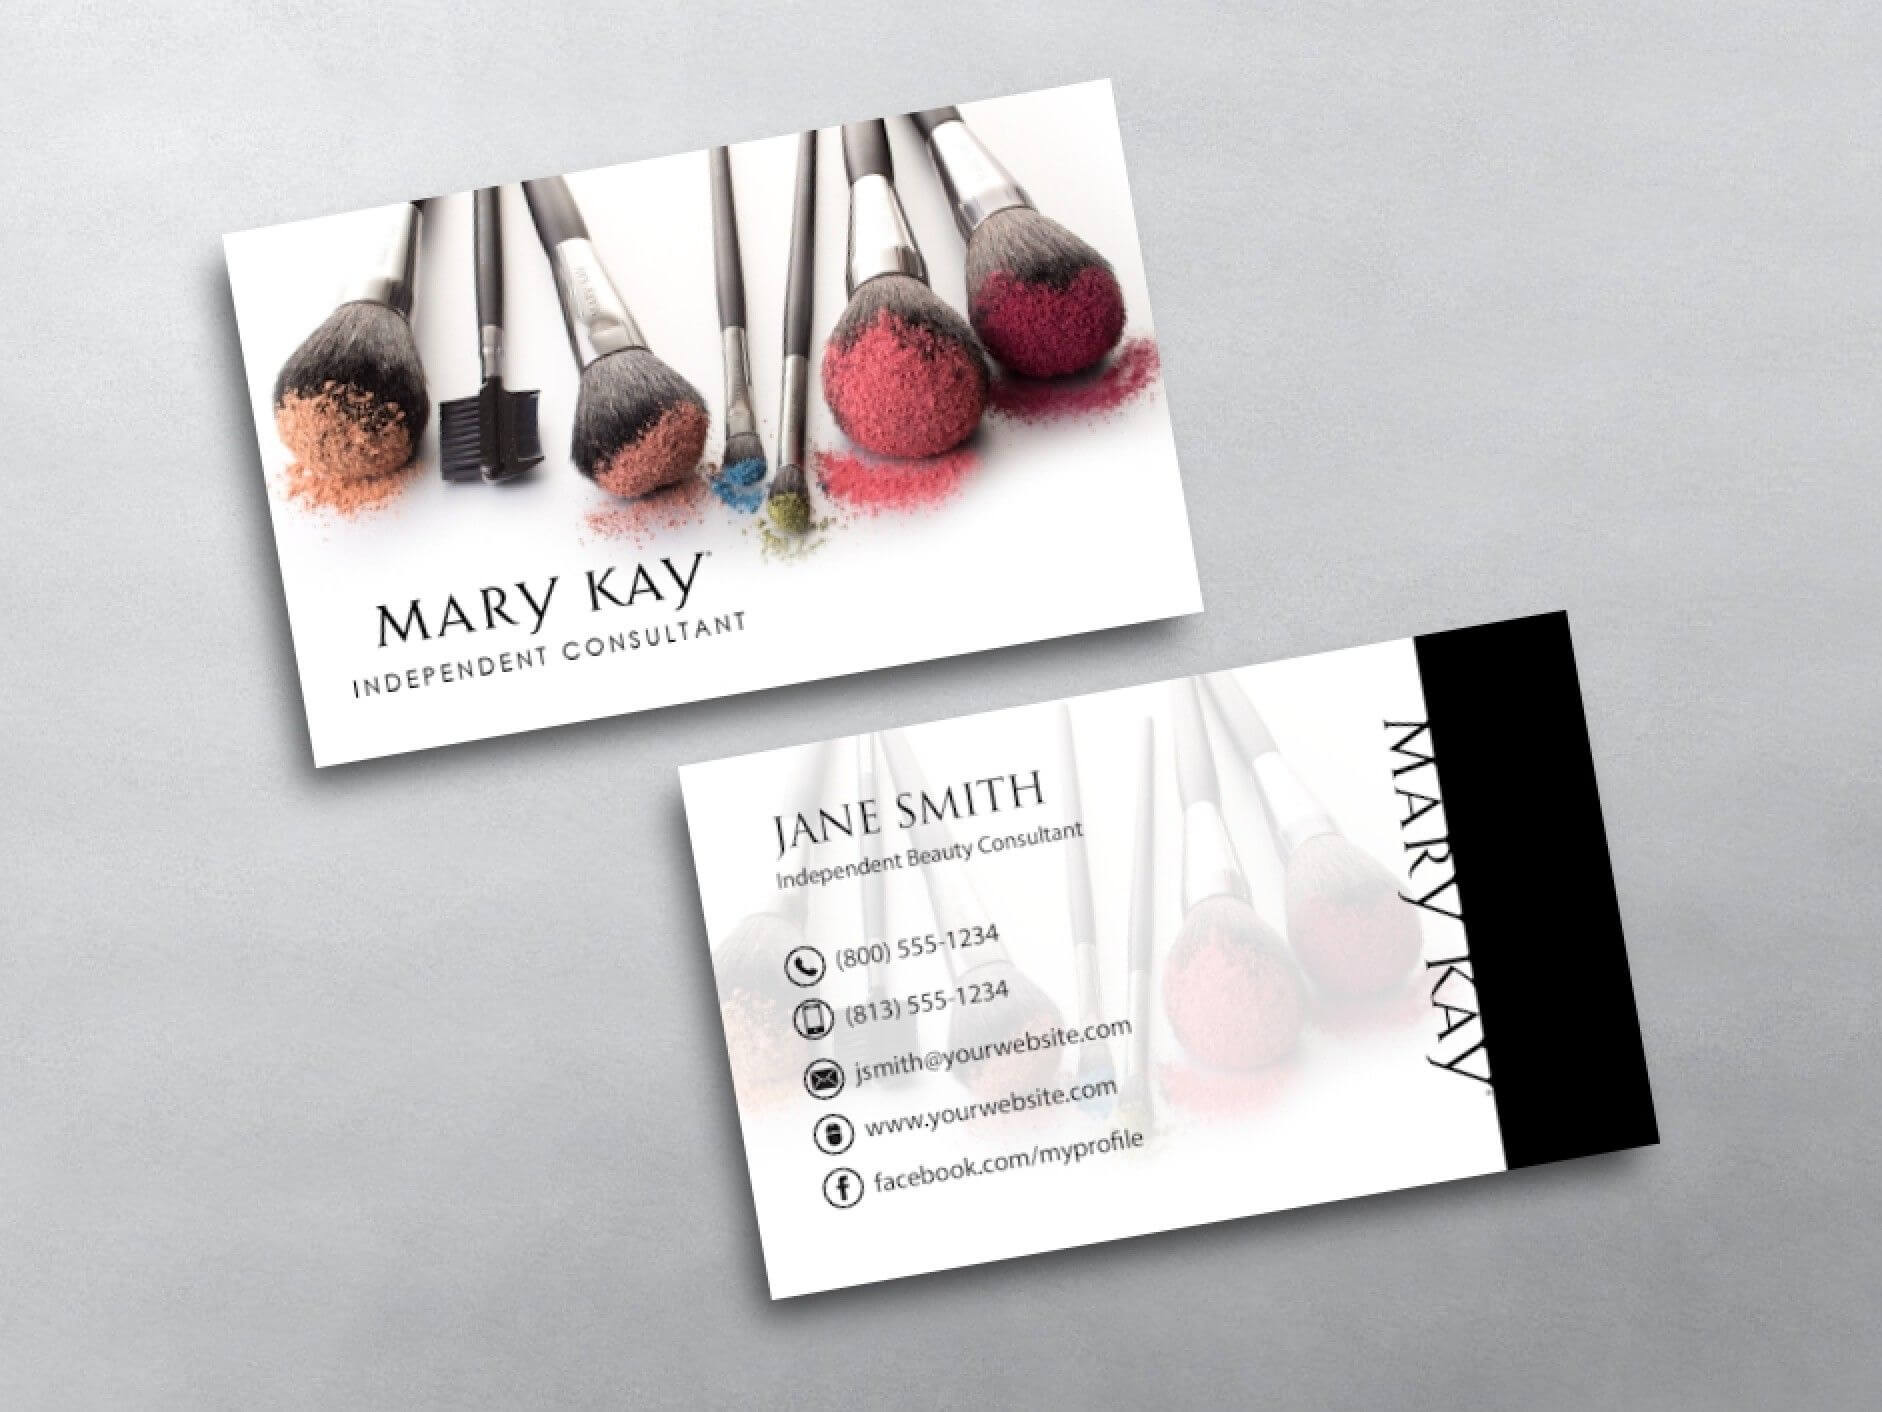 Mary Kay Business Cards In 2019 | Mary Kay, Makeup Artist For Mary Kay Business Cards Templates Free